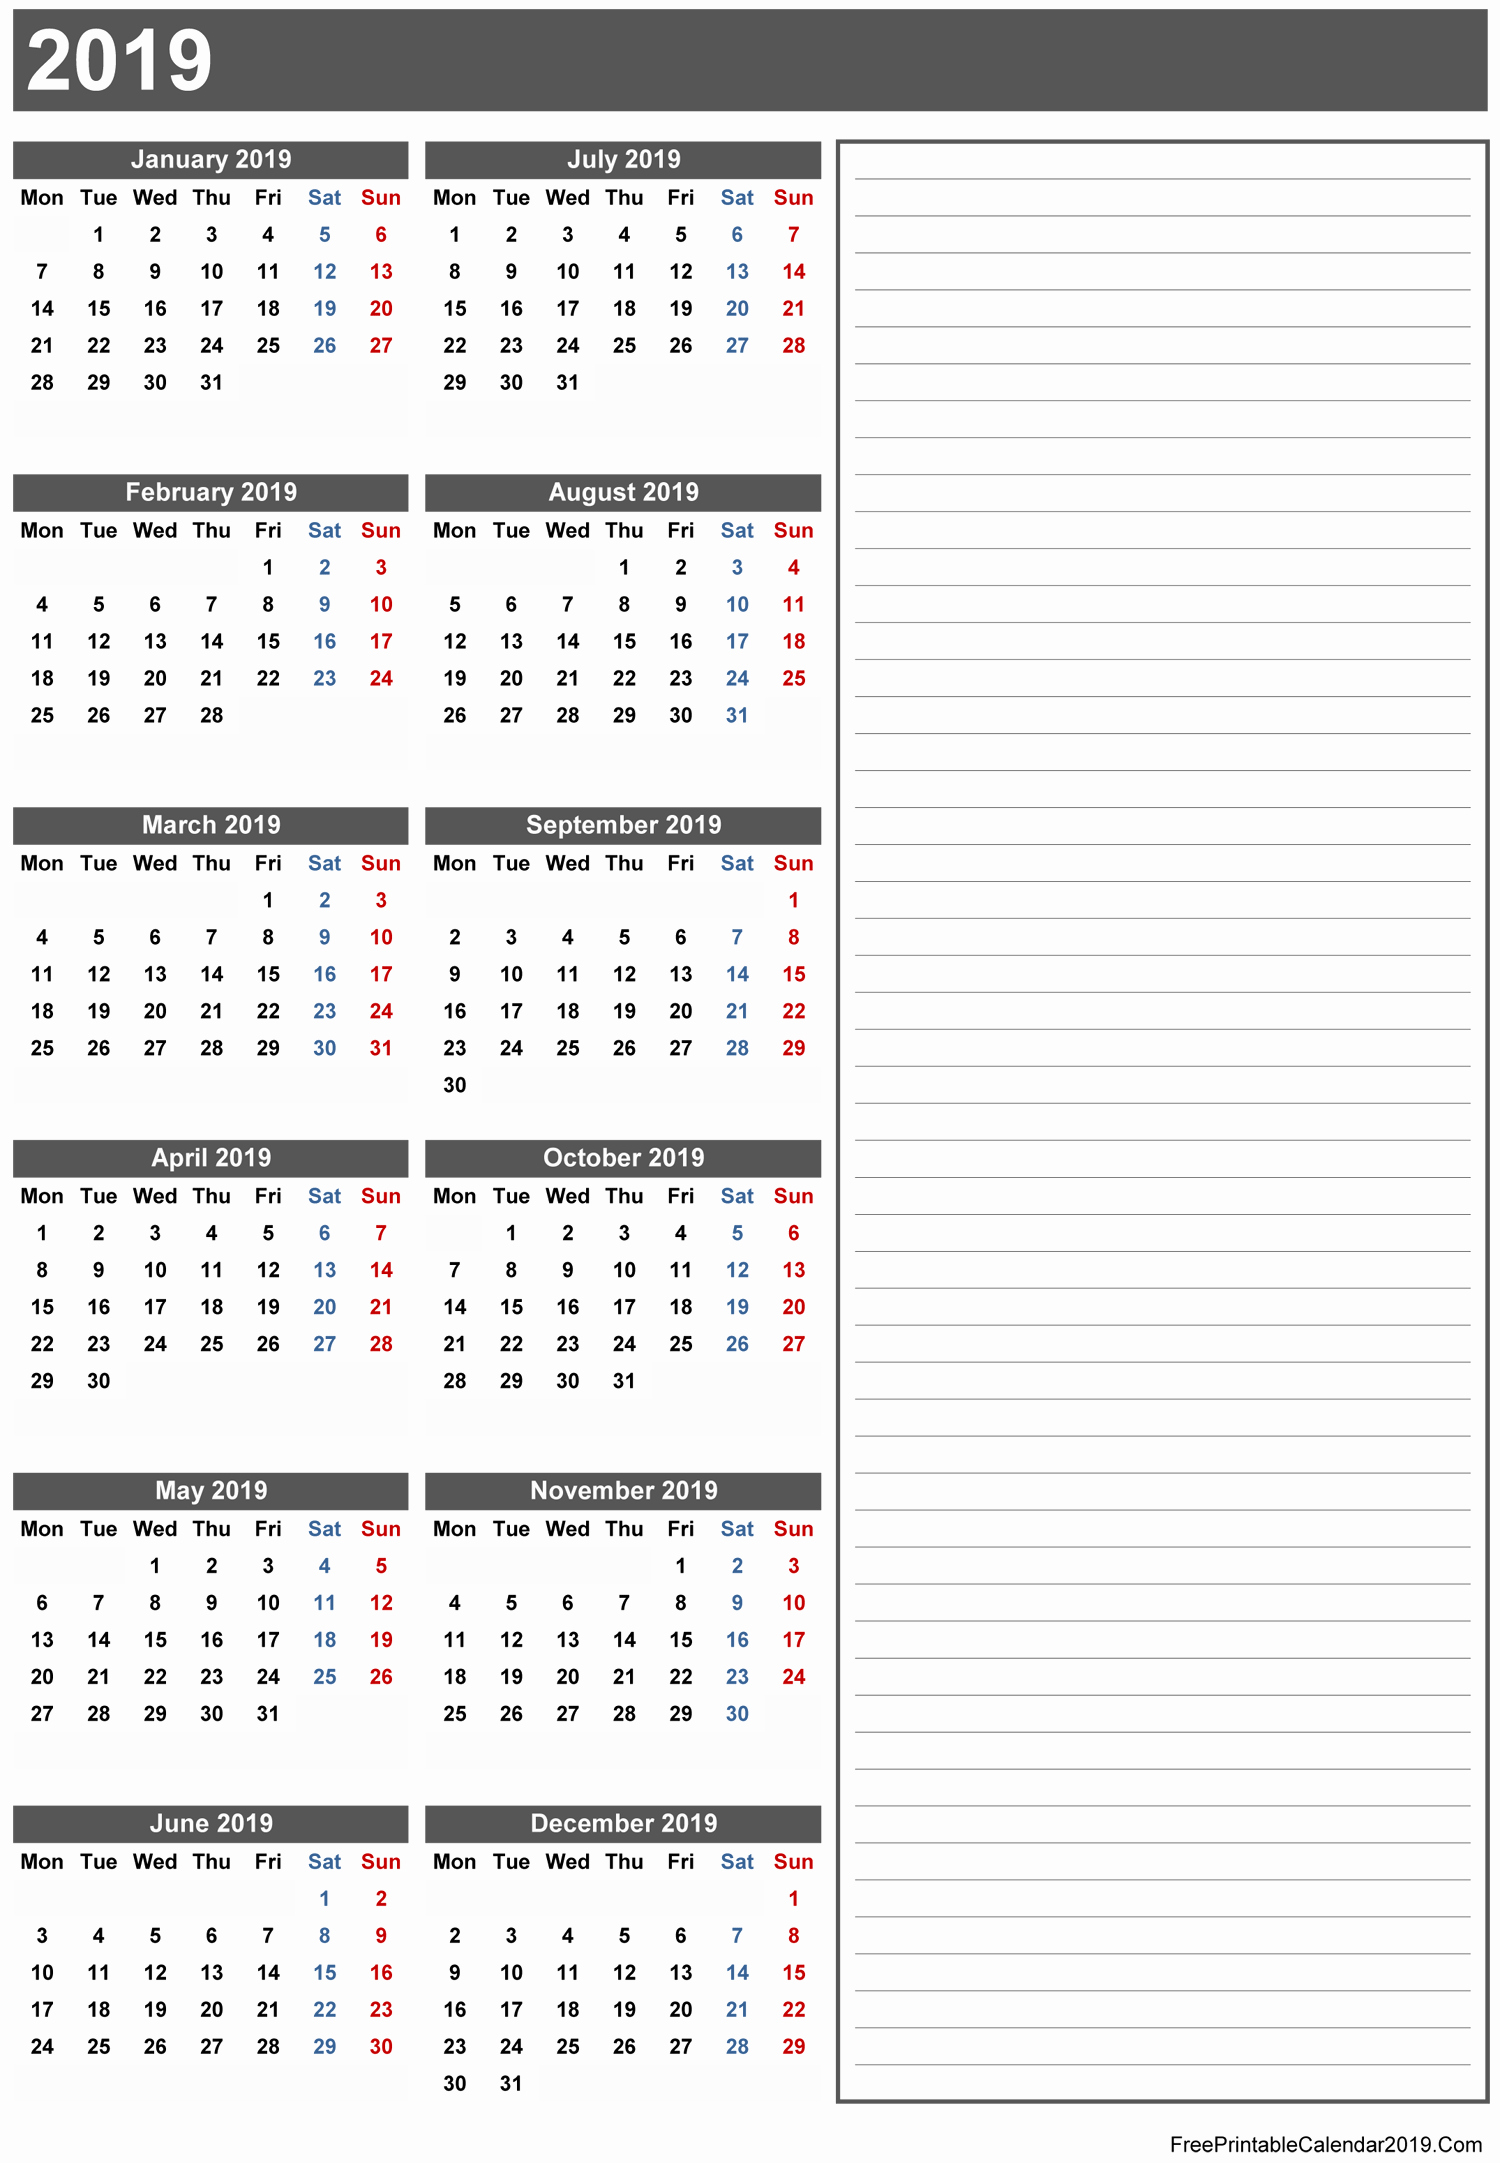 Free Printable 2019 Yearly Calendar New Free Printable Calendar 2019 with Holidays In Word Excel Pdf